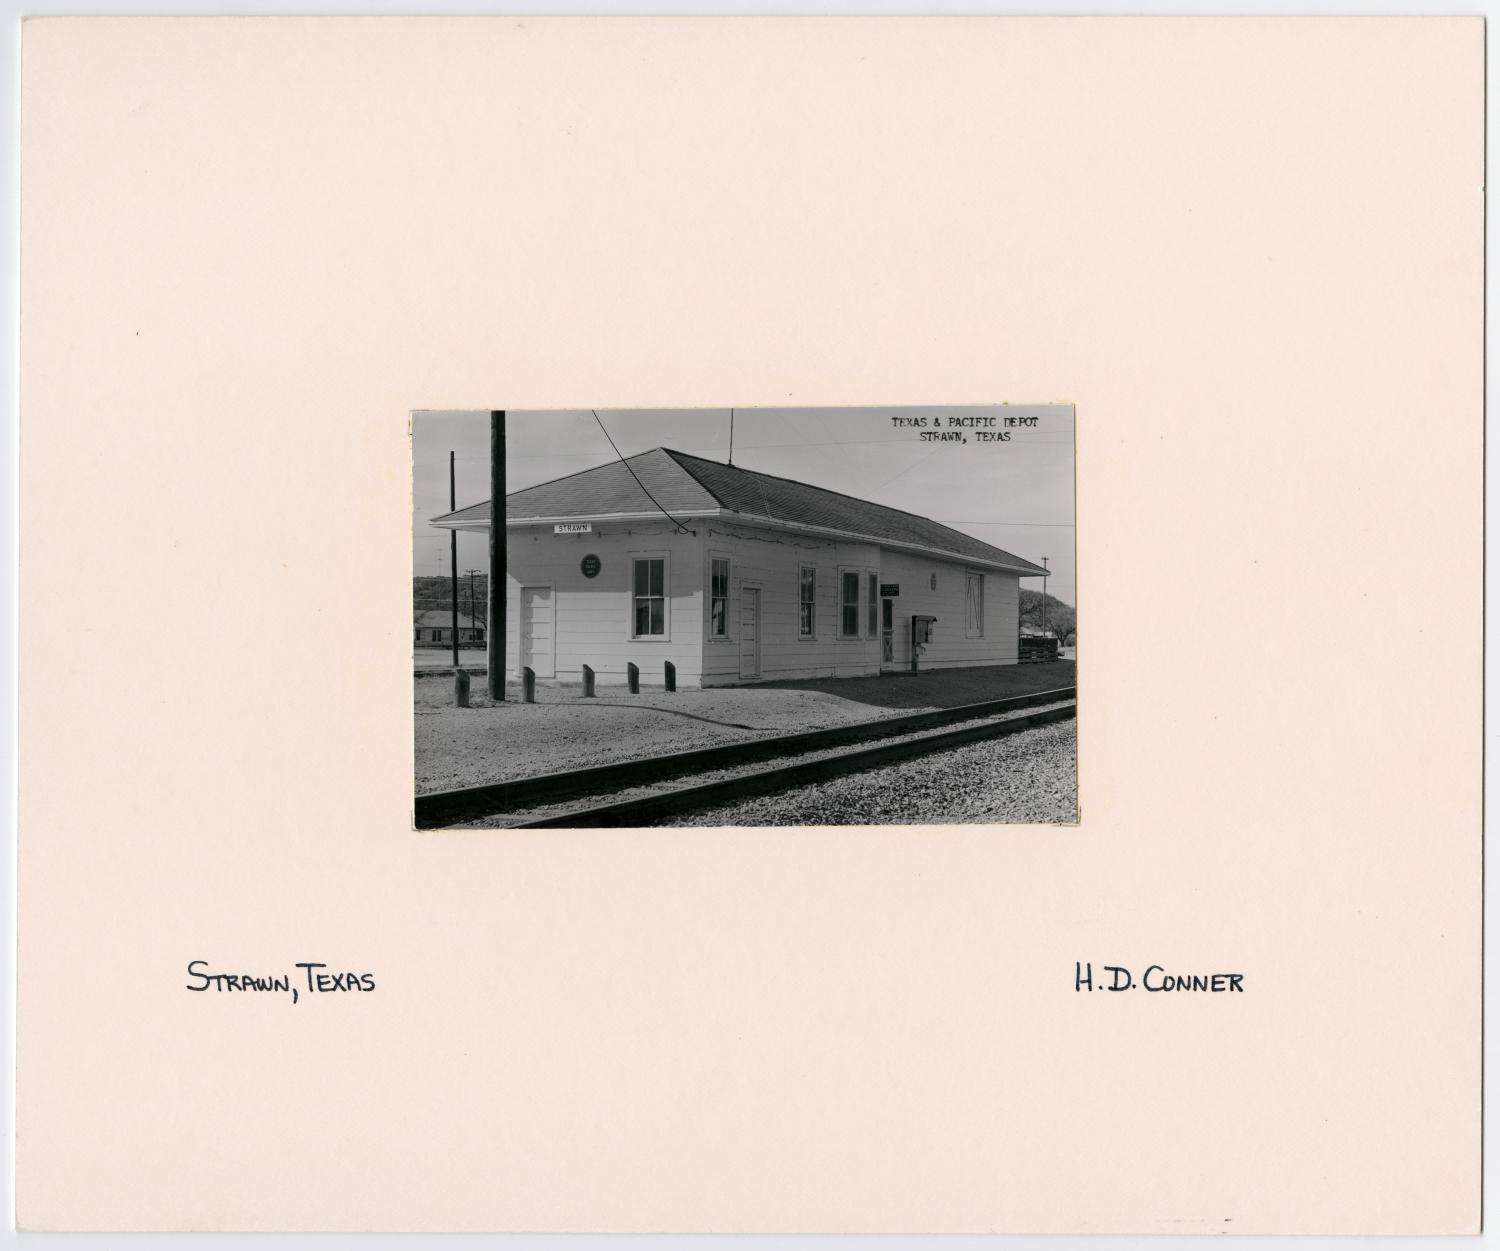 Images of Texas & Pacific Stations and Structures in  Strawn, TX